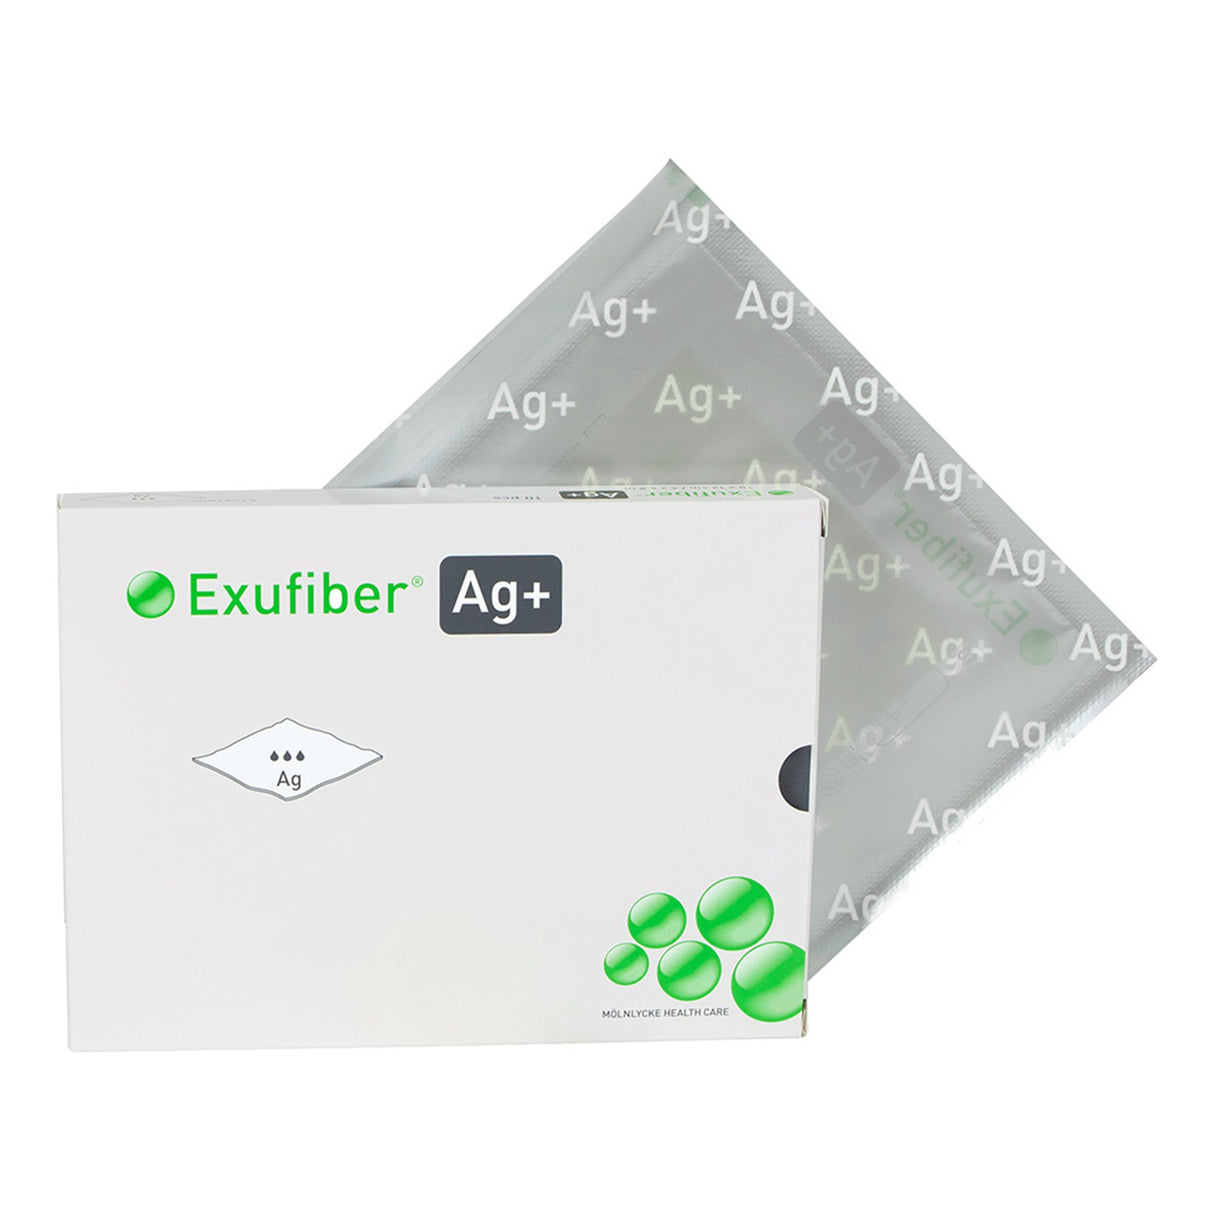 Exufiber® Ag+ 2 x 2 Silver Dressing - Box of 10